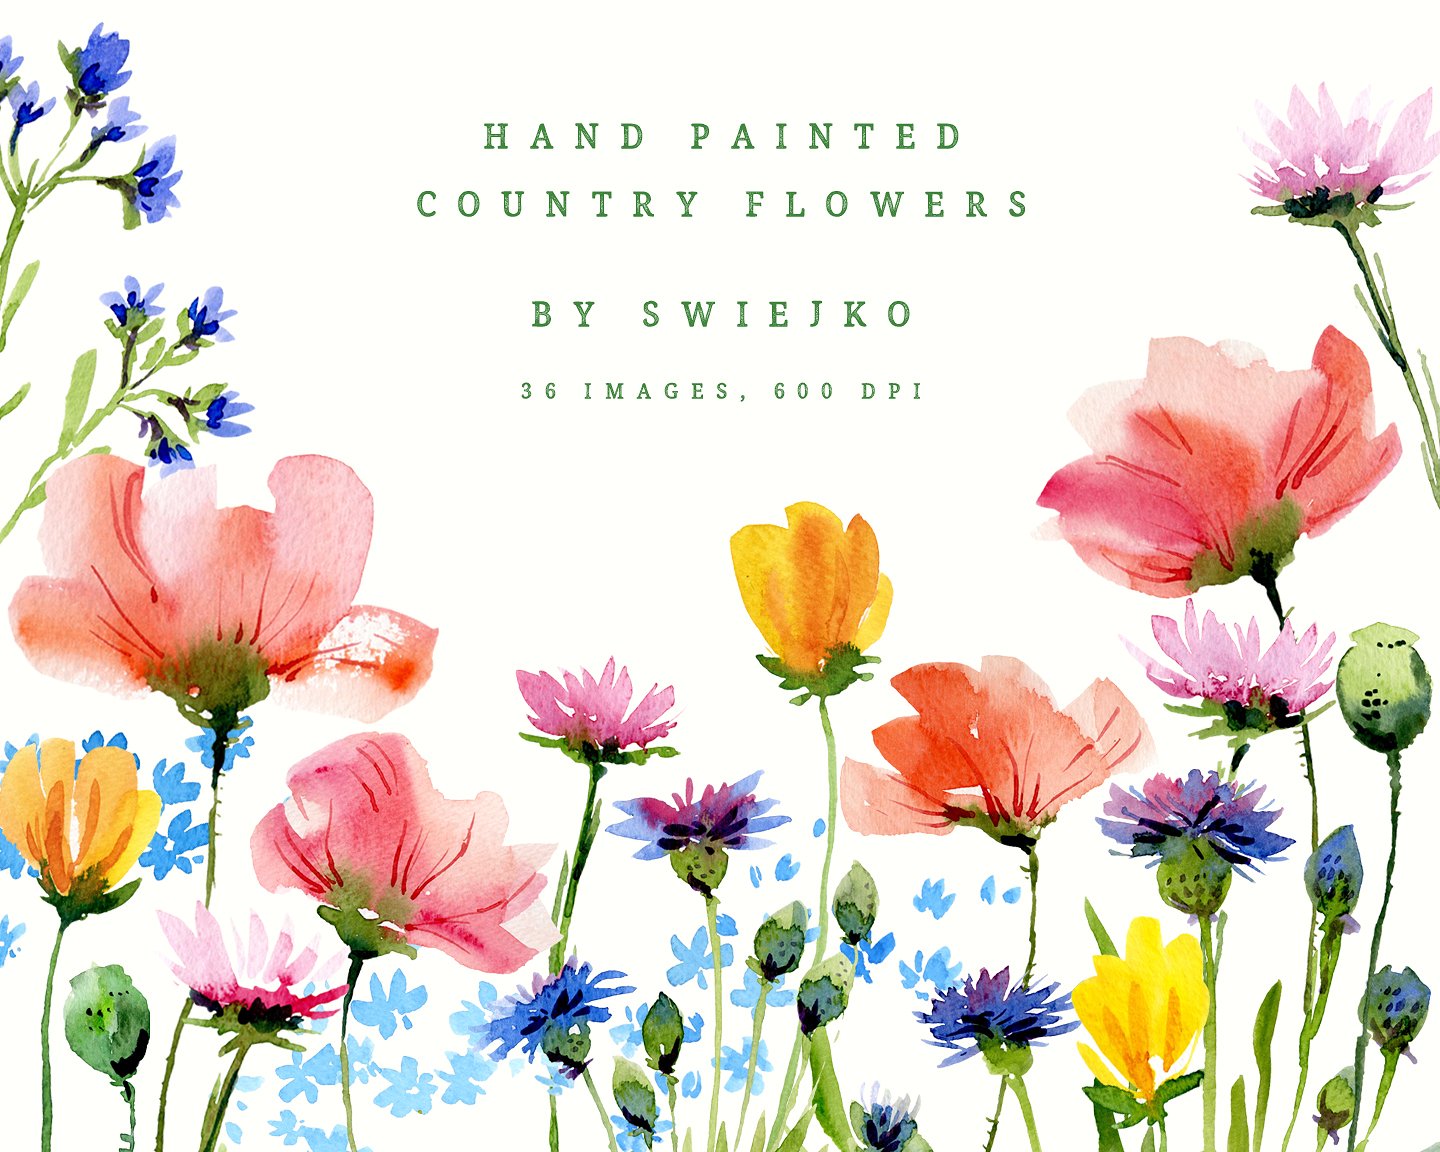 Hand painted country flowers